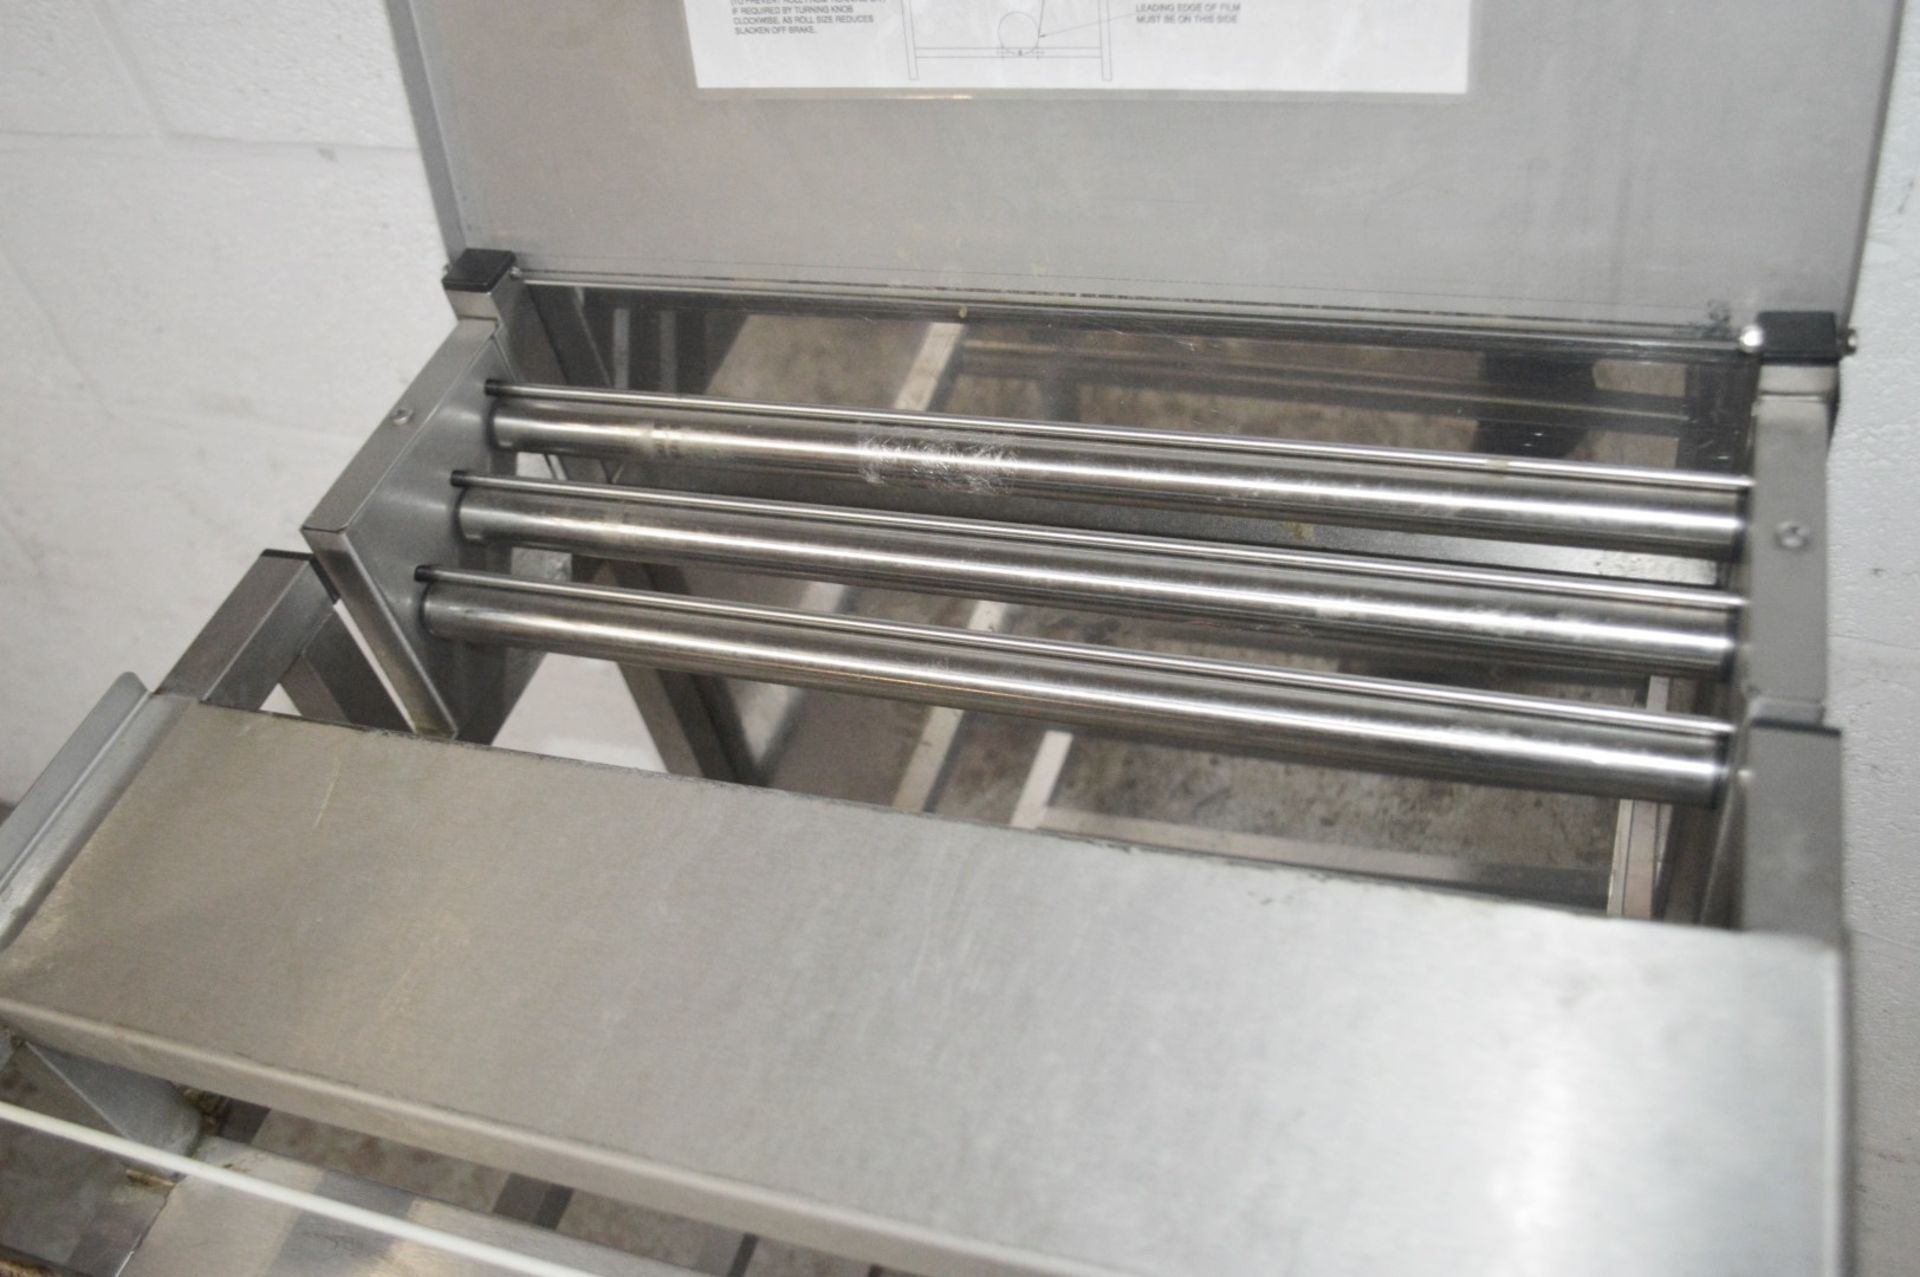 1 x Stainless Steel Commercial Kitchen Sealer Bench With Modesty Panel - Dimensions: H98 x W56 x - Image 4 of 6